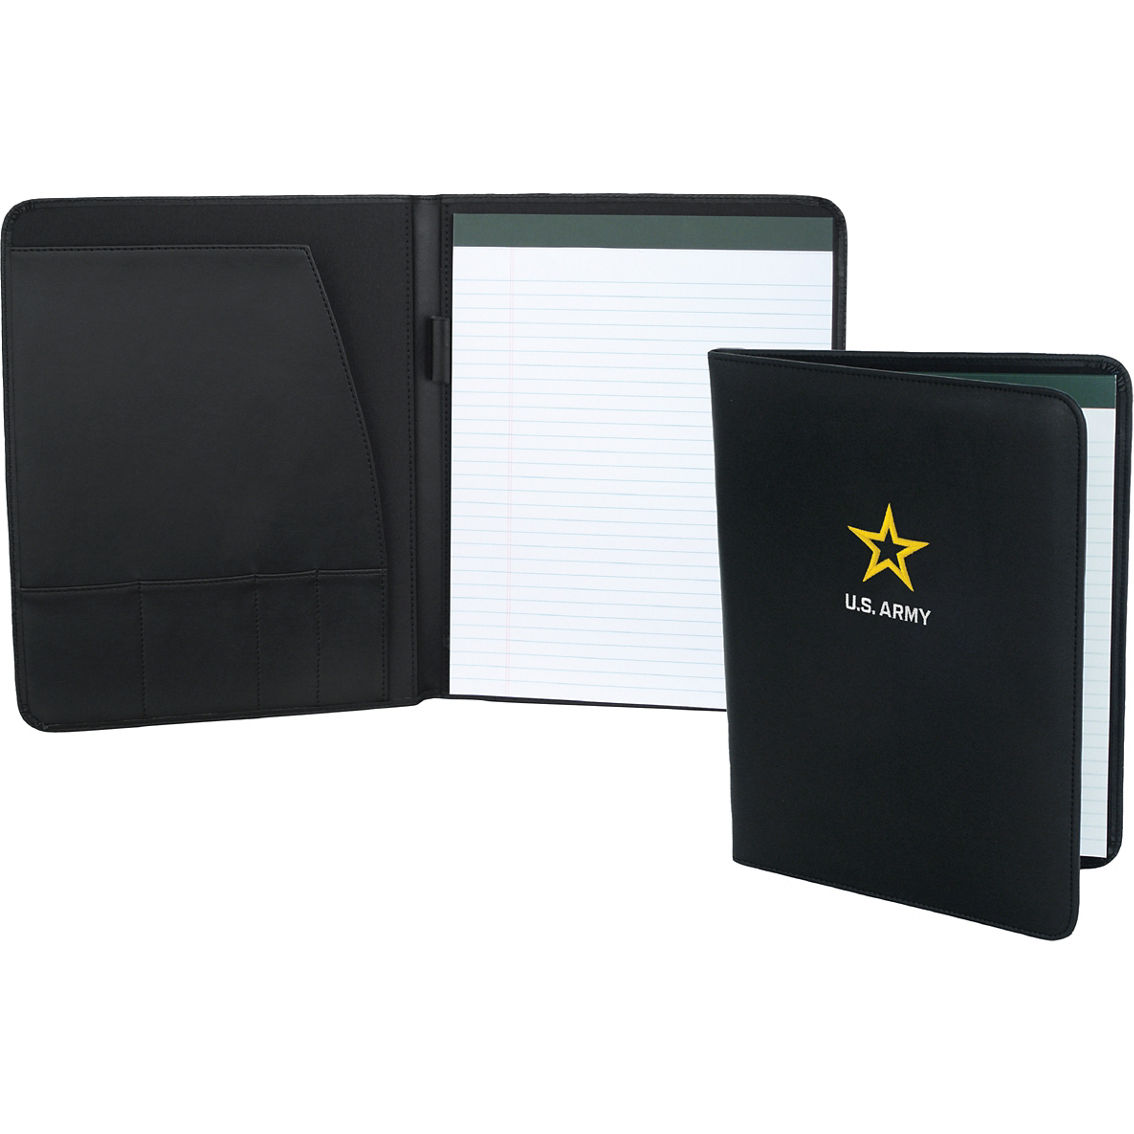 Mercury Tactical Gear Padfolio, Army Star - Image 3 of 3